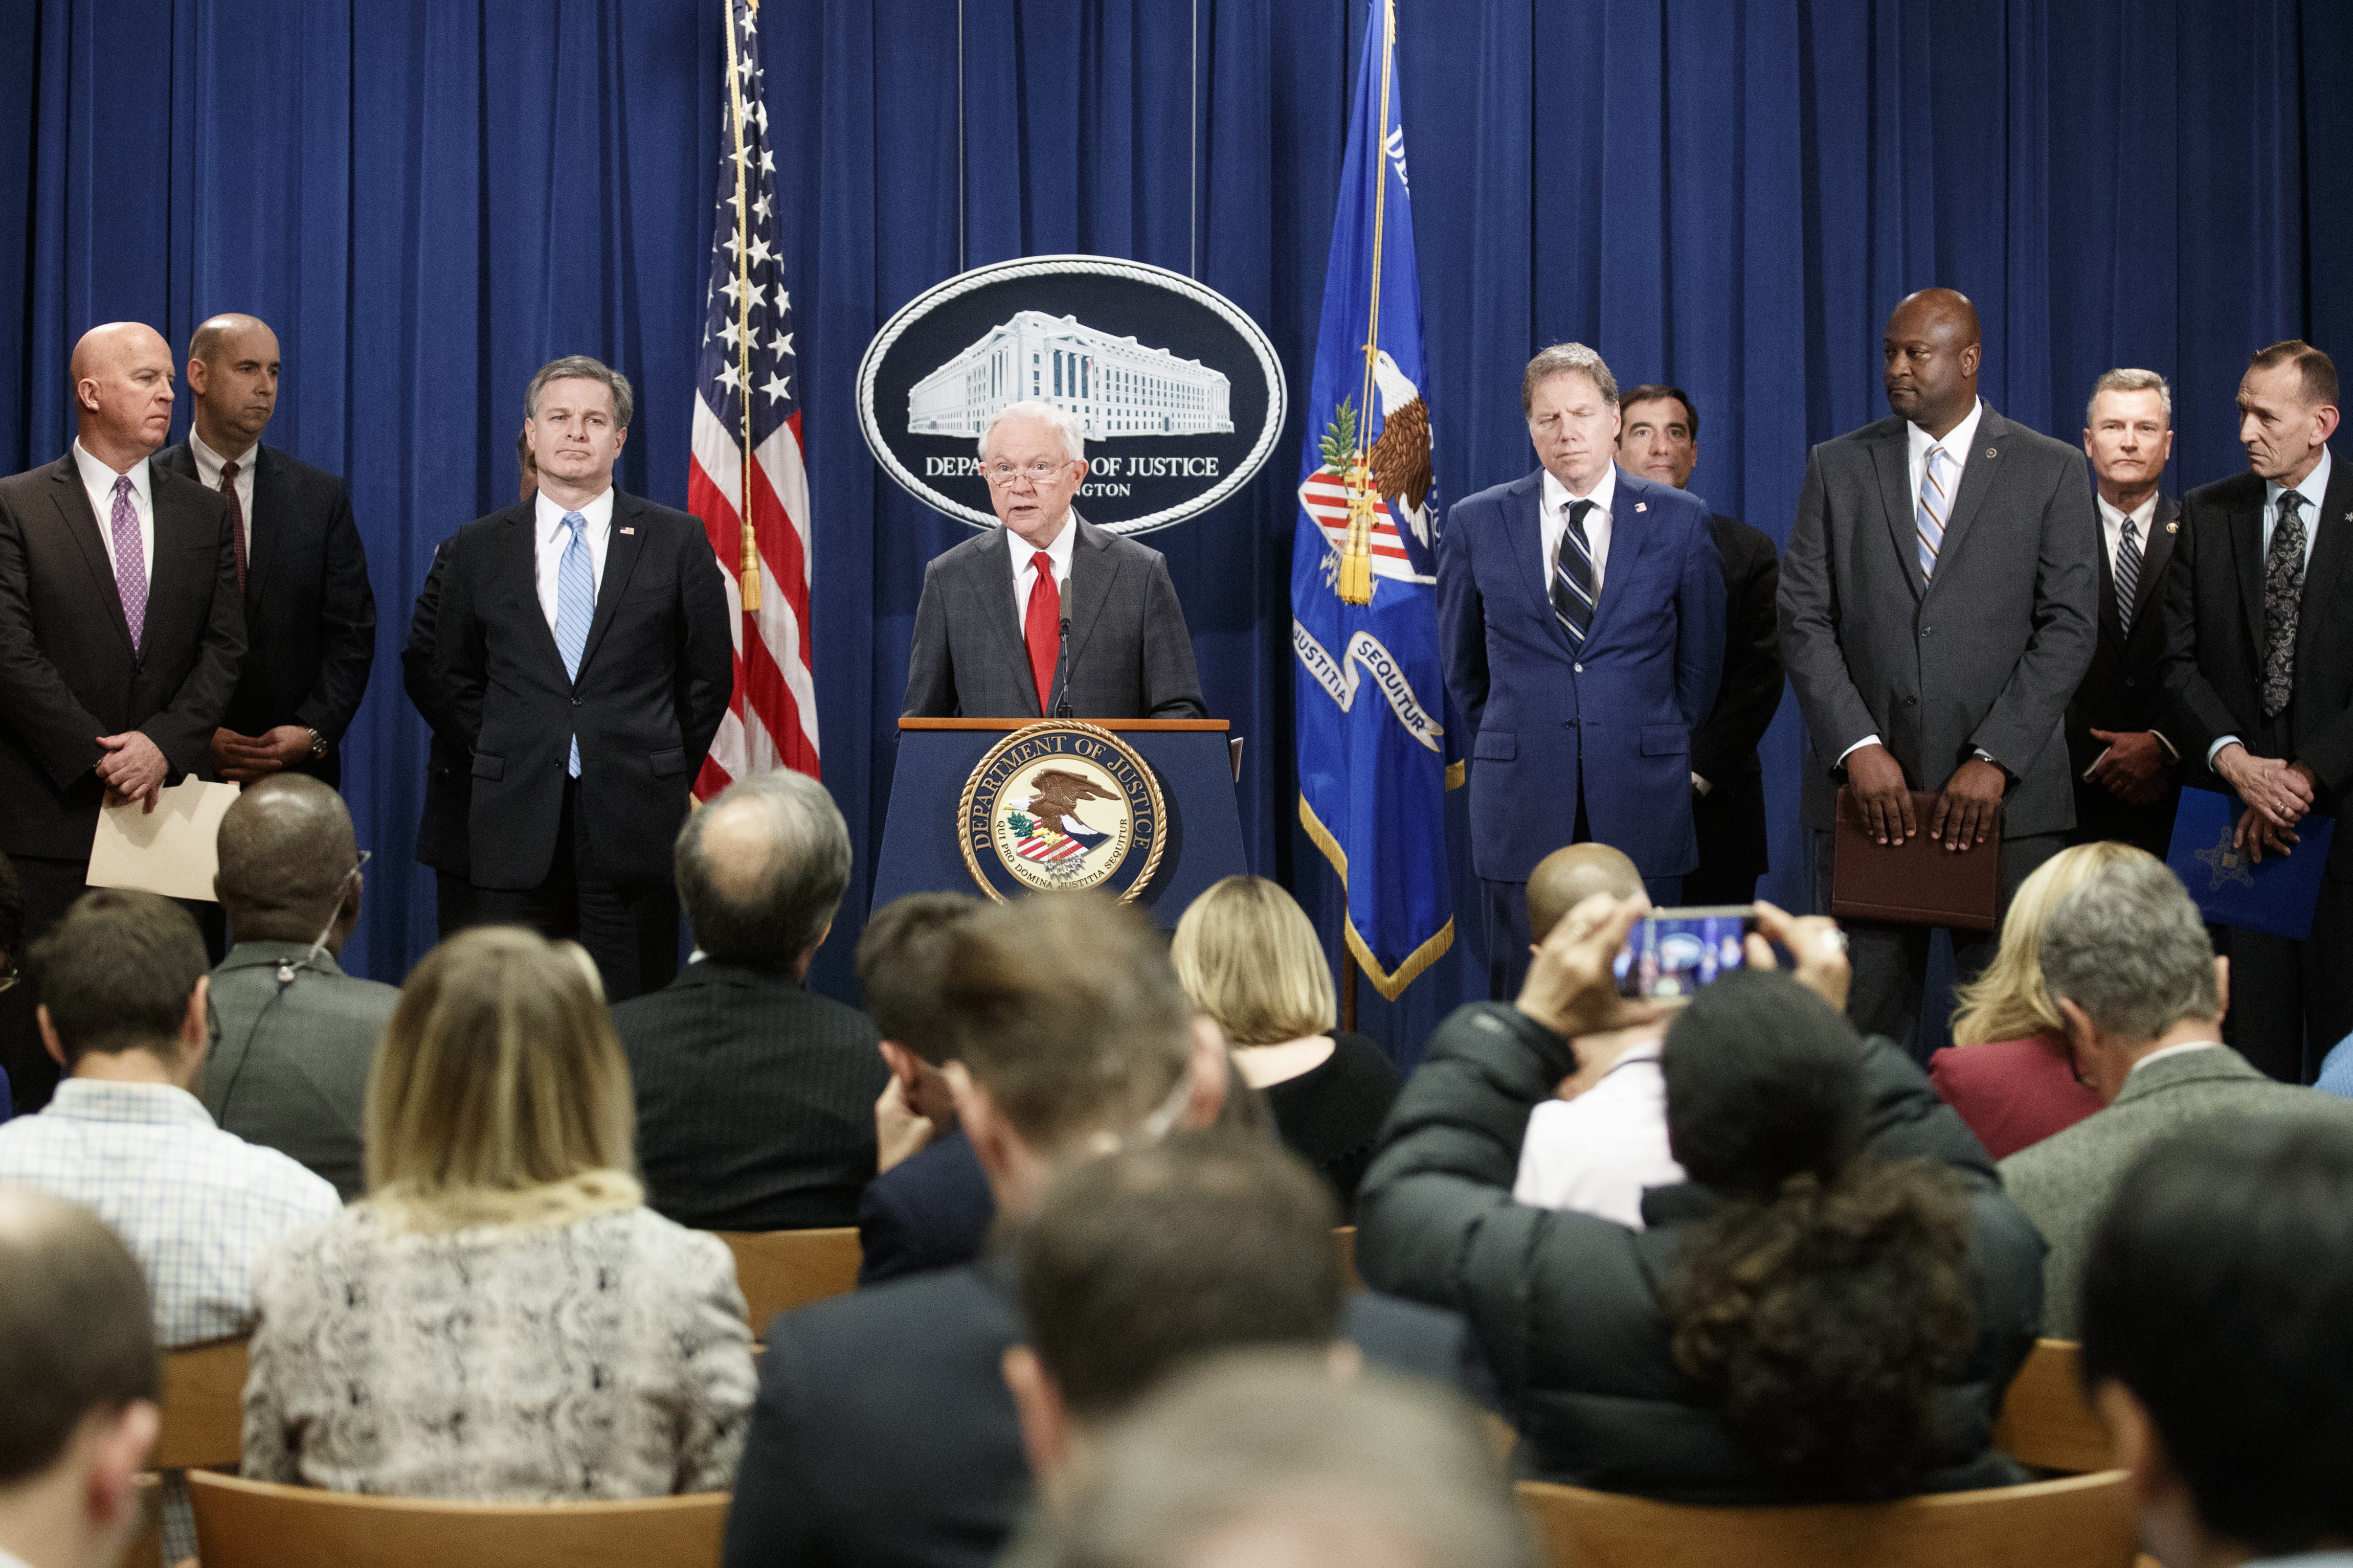 epa07122072 US Attorney General Jeff Sessions (C) delivers remarks on the apprehension and arrest of mail bomb suspect Cesar Sayoc jr. during a press conference at the Department of Justice in Washington, DC, USA, 26 October 2018. Attorney General Sessions was joined FBI Director Chris Wray, New York Police Department Commissioner James P. O'Neill, U.S. Attorney Geoffrey Berman for the Southern District of New York, ATF Deputy Director Thomas E. Brandon, FBI New York Field Office Assistant Director in Charge William F. Sweeney, Jr. and U.S. Postal Inspection Service Deputy Chief Gary Barksdale.  EPA/SHAWN THEW